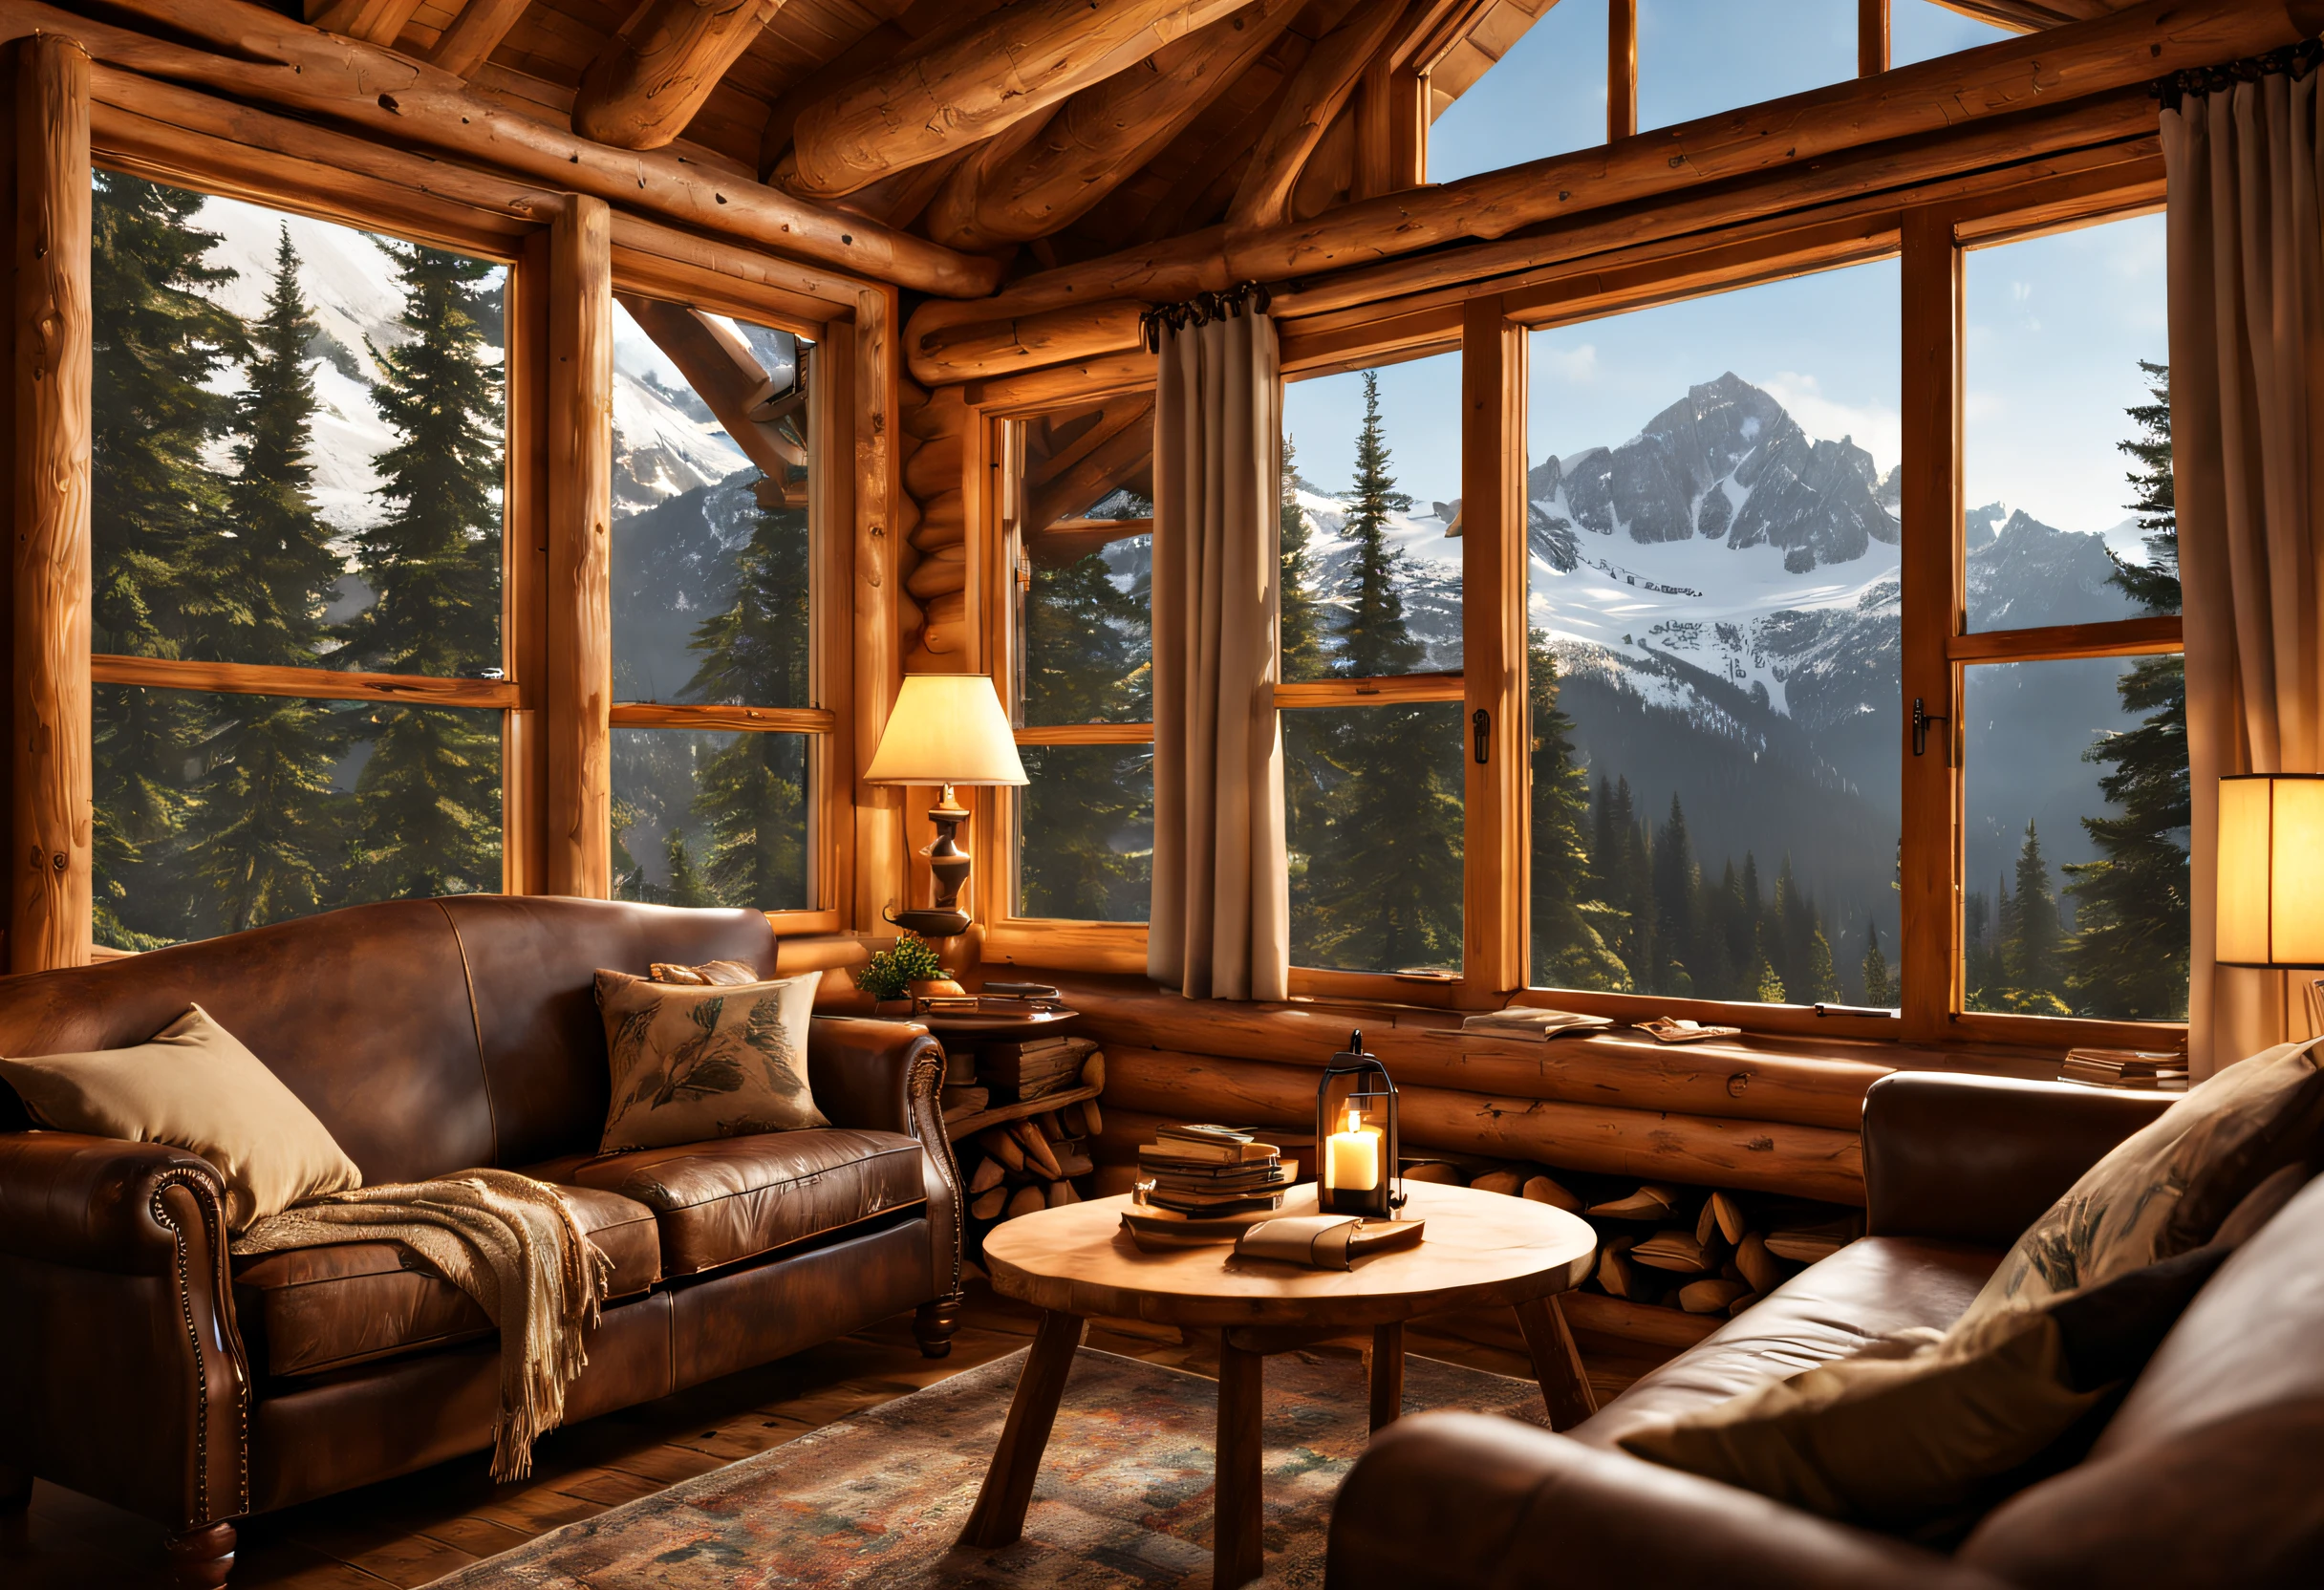 (best quality,4k,8k,highres,masterpiece:1.2),ultra-detailed,(realistic,photorealistic,photo-realistic:1.37),Small mountain cabin,wooden cabin with beautiful details and craftsmanship,secluded location,nestled in the pristine forest,tucked away among towering trees,cozy interior with a crackling fireplace,warm and inviting atmosphere,panoramic view of majestic snow-capped mountains,stunning landscapes visible from every window,tranquil and serene,surrounded by lush greenery,majestic peaks in the distance,picturesque mountain range in the backdrop,crisp and fresh mountain air,light streaming through the tall windows,illuminating the rustic furniture and wooden beams,soft and cozy blankets and cushions,wood-burning stove providing warmth,inviting aroma of home-cooked meals lingering in the air,exquisite wooden furnishings,each piece crafted with love and care,natural materials giving a sense of warmth and comfort,fireplace mantel adorned with hand-carved decorations,inviting nooks and corners to curl up with a book,peaceful sound of crackling fire mixing with distant bird songs,flickering candlelight casting a warm glow on the walls,artistic paintings and photographs adorning the walls,a small library of books for hikers and mountaineers,every corner of the cabin filled with stories and memories,enticing aroma of freshly brewed coffee,steaming mugs on the table,inviting hikers and mountaineers to rest and recharge,cosy bedrooms with comfortable beds and soft linens,restful sleep after a long day of exploring the mountains,starry nights with millions of twinkling lights overhead,a mountain cabin retreat for adventure and tranquility.